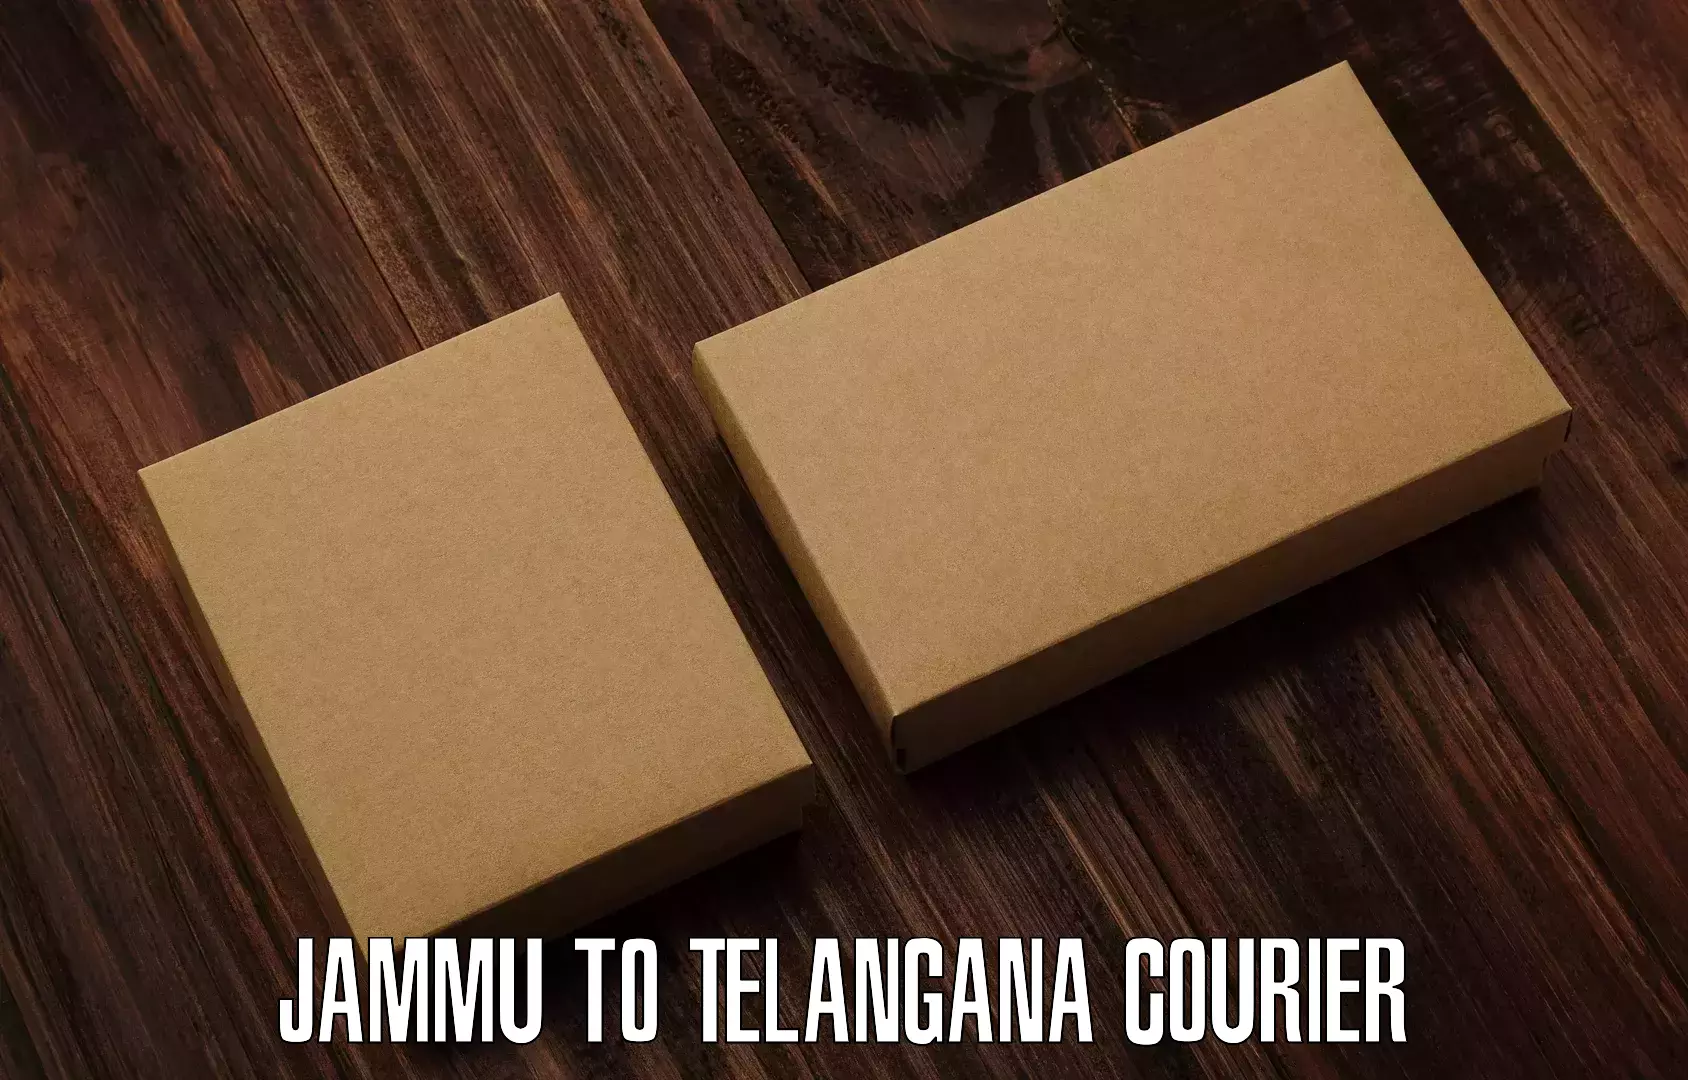 Doorstep delivery service Jammu to Trimulgherry